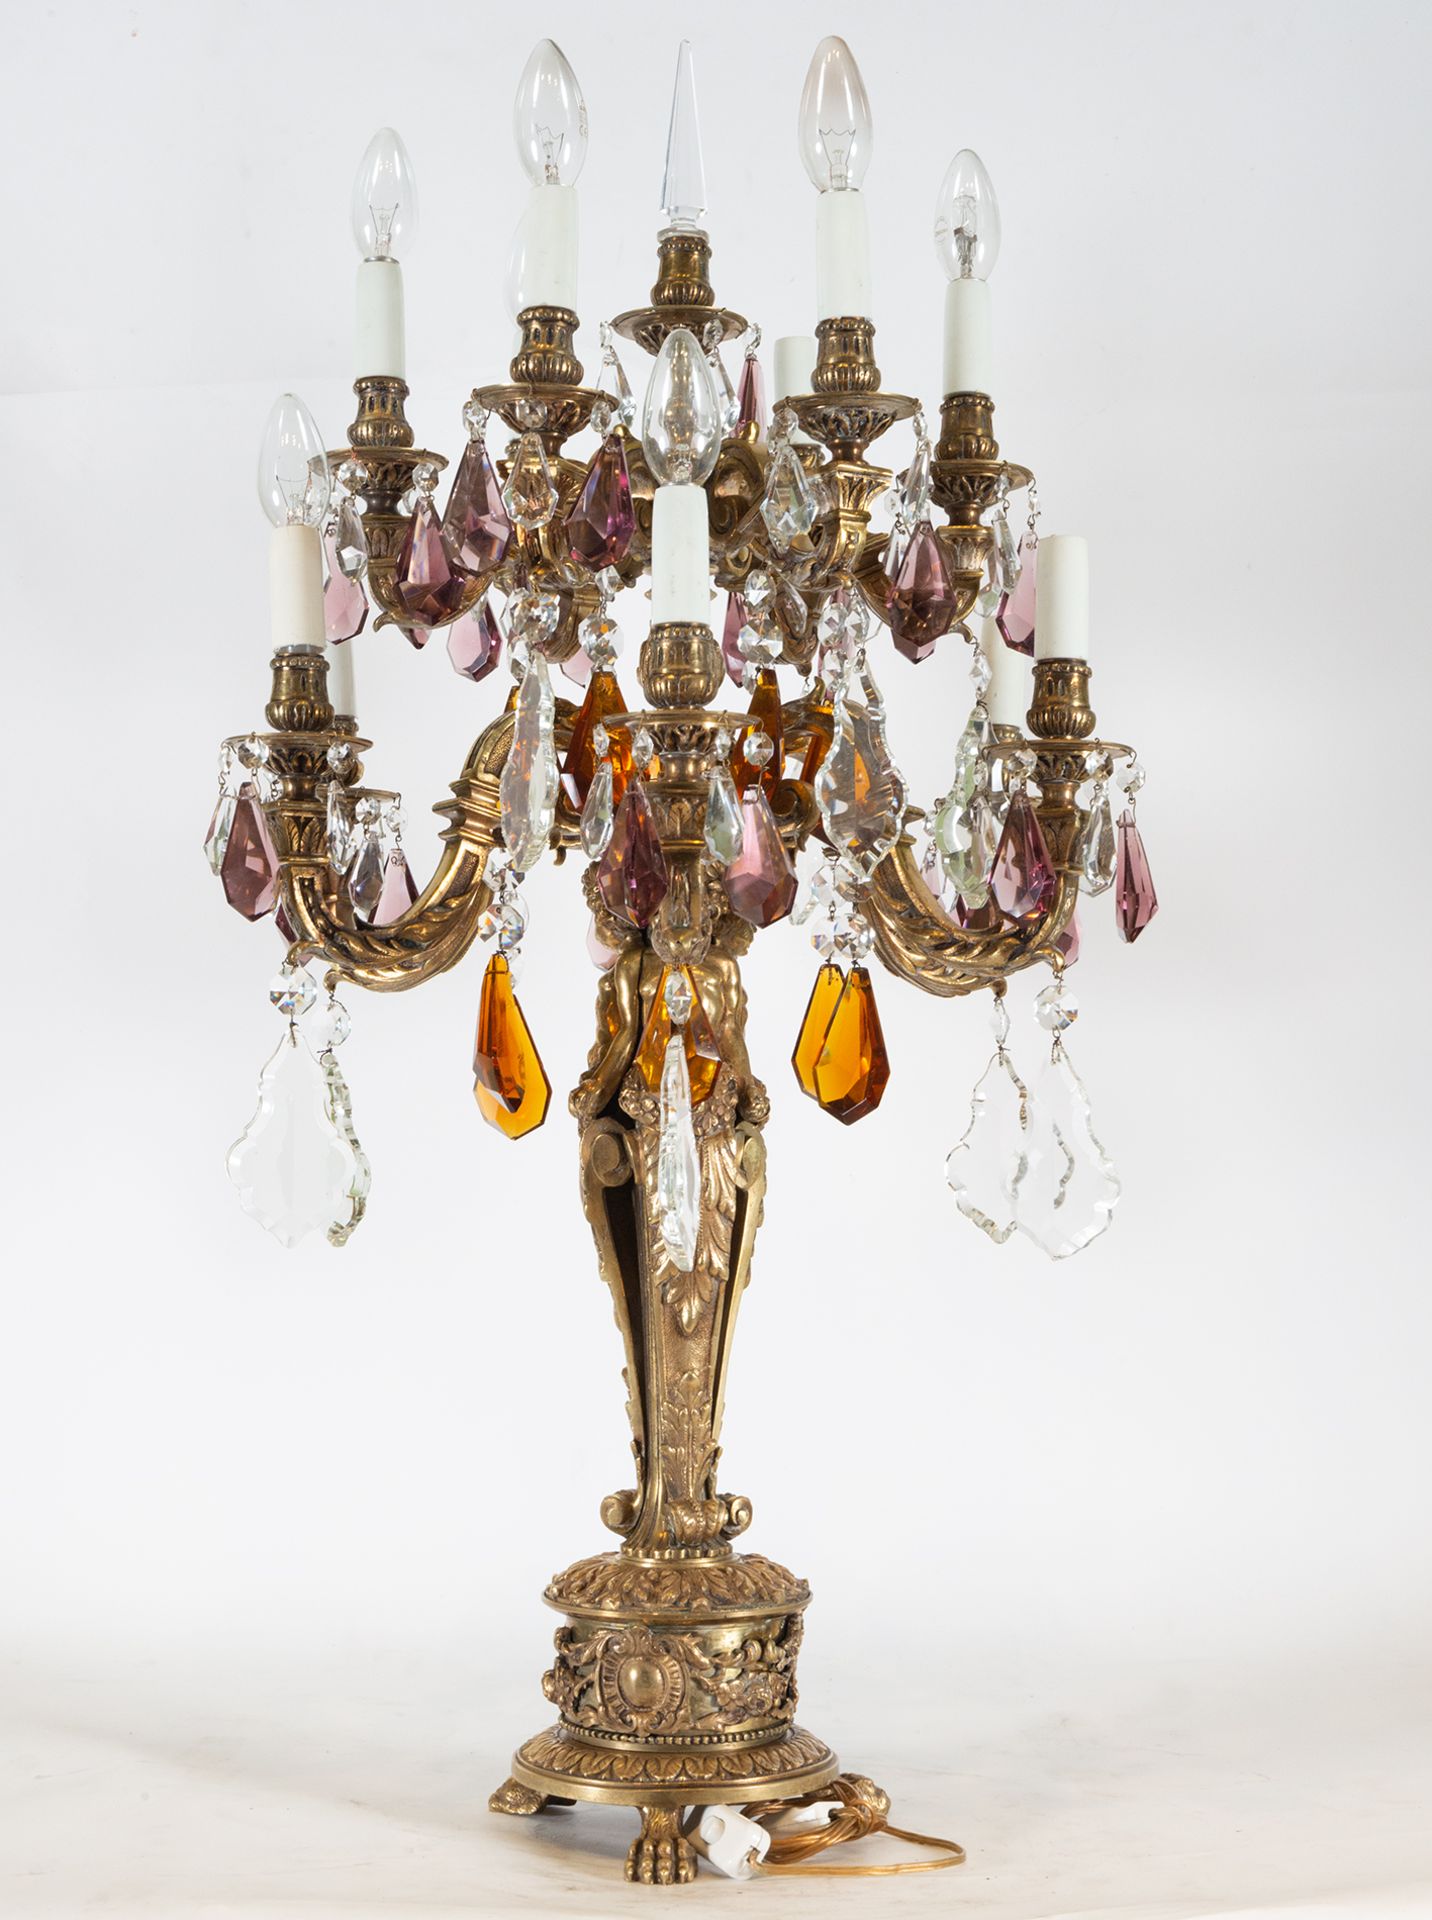 Pair of bronze candlesticks, early 20th century - Image 2 of 6